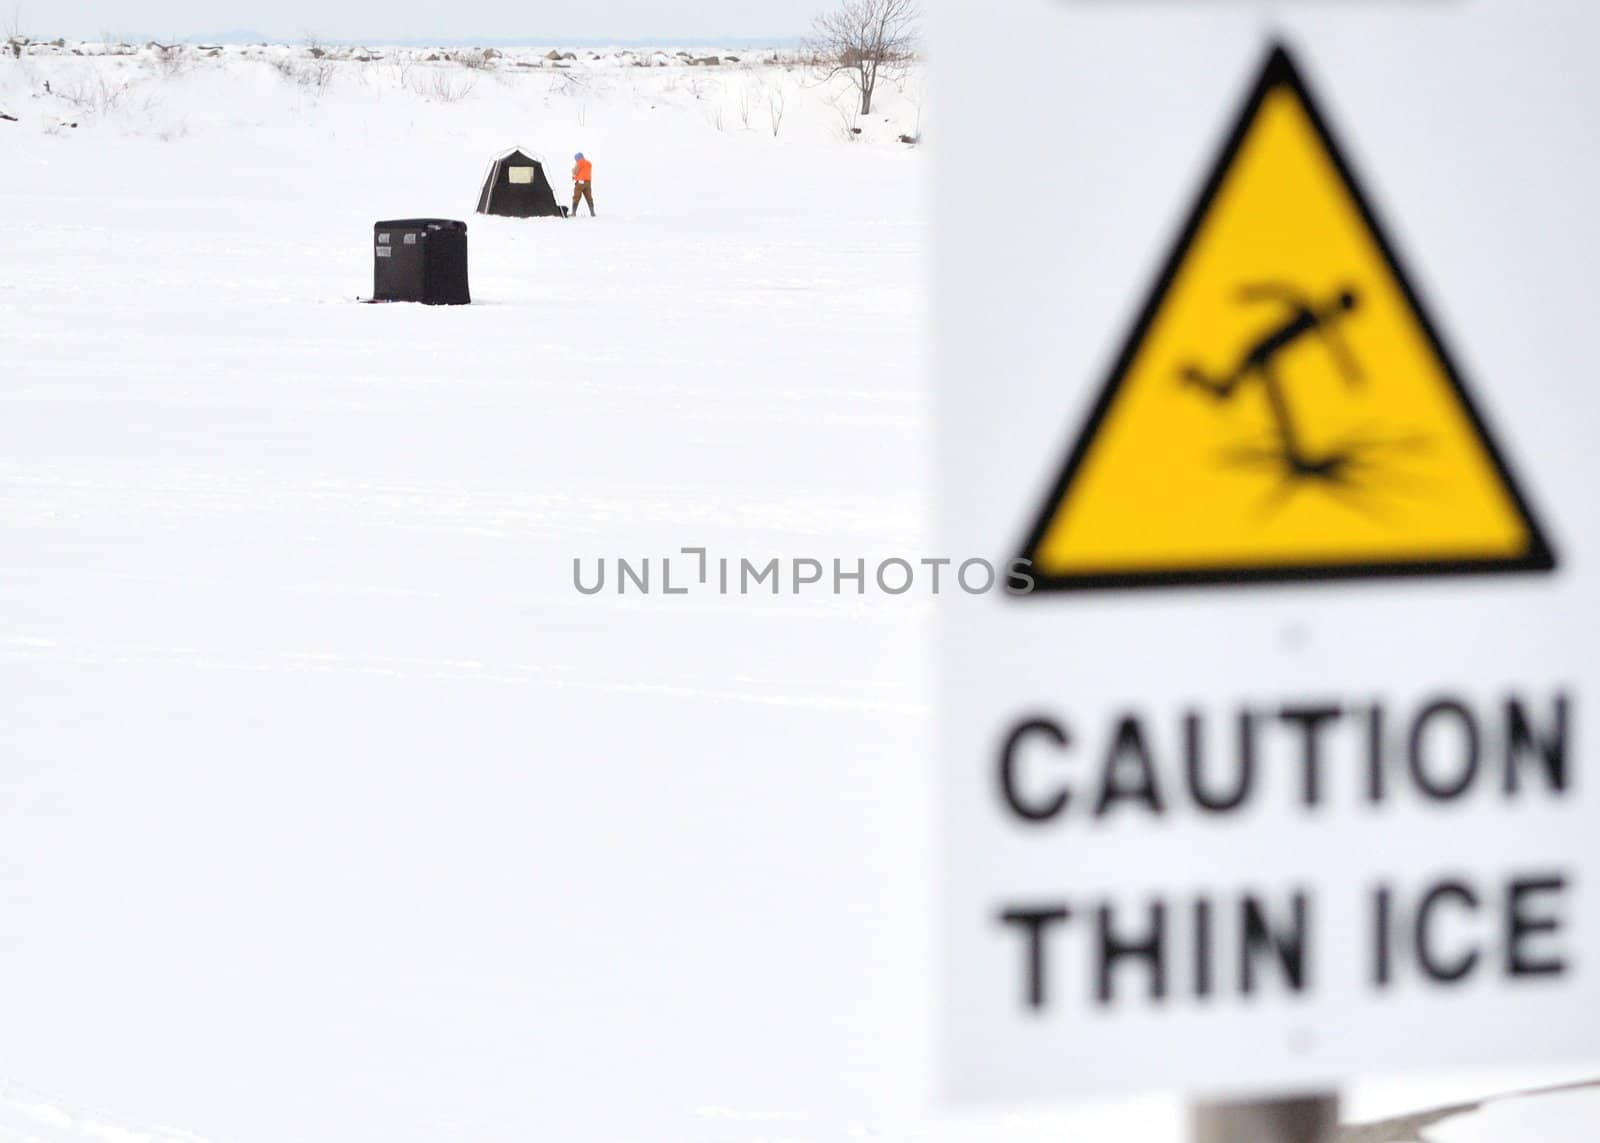 A thin ice warning sign for frozen lake with ice fisherman on the lake.